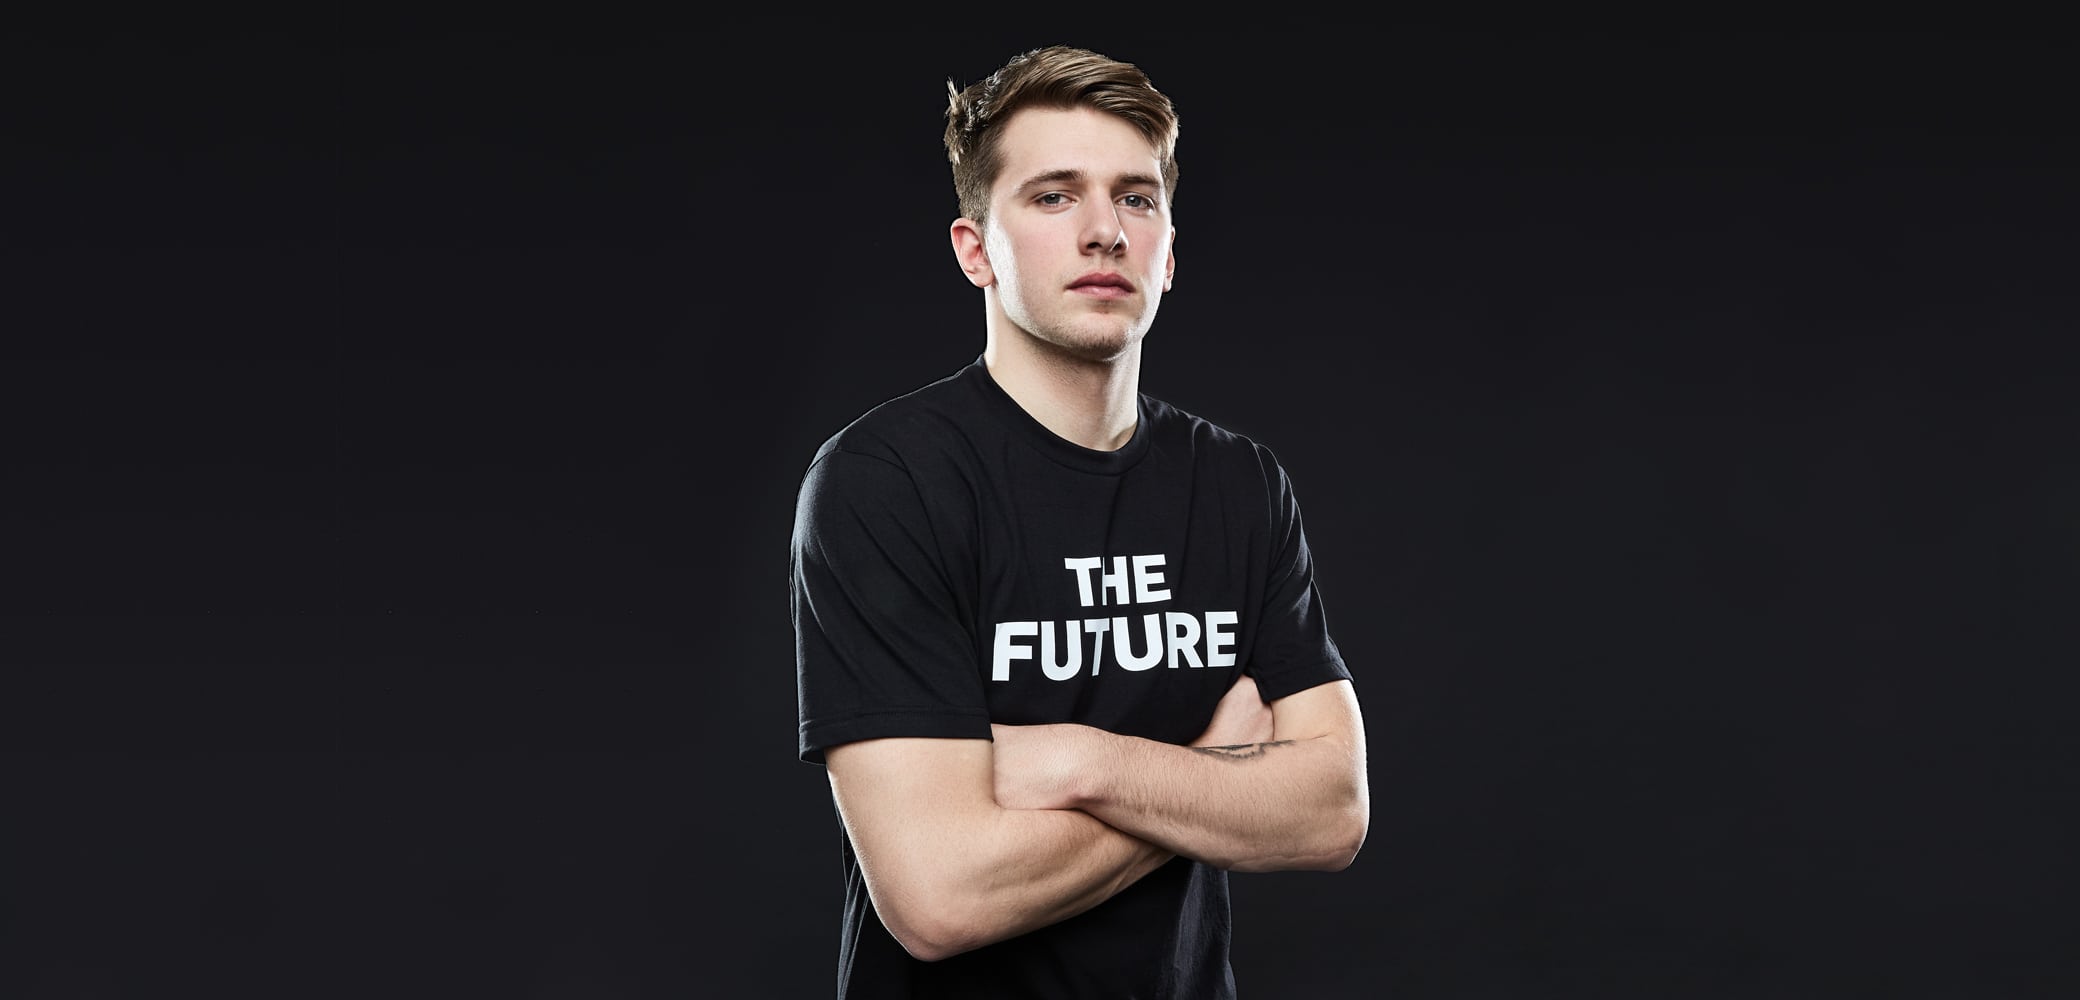 Luka Doncic interview